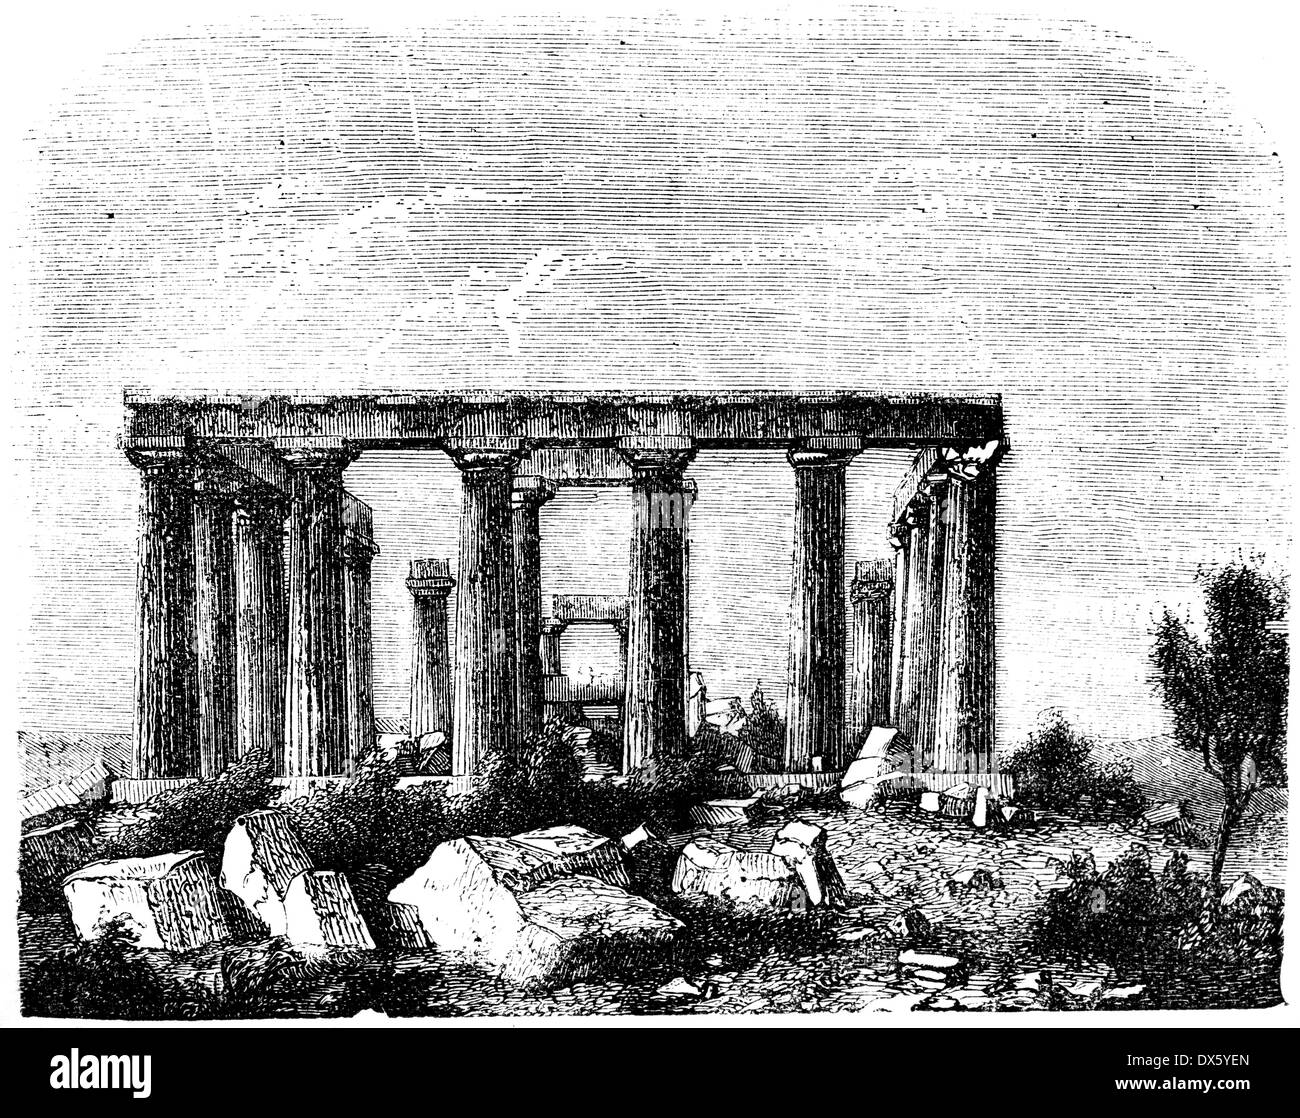 Ruins of ancient Greek temple, illustration from book dated 1878 Stock Photo